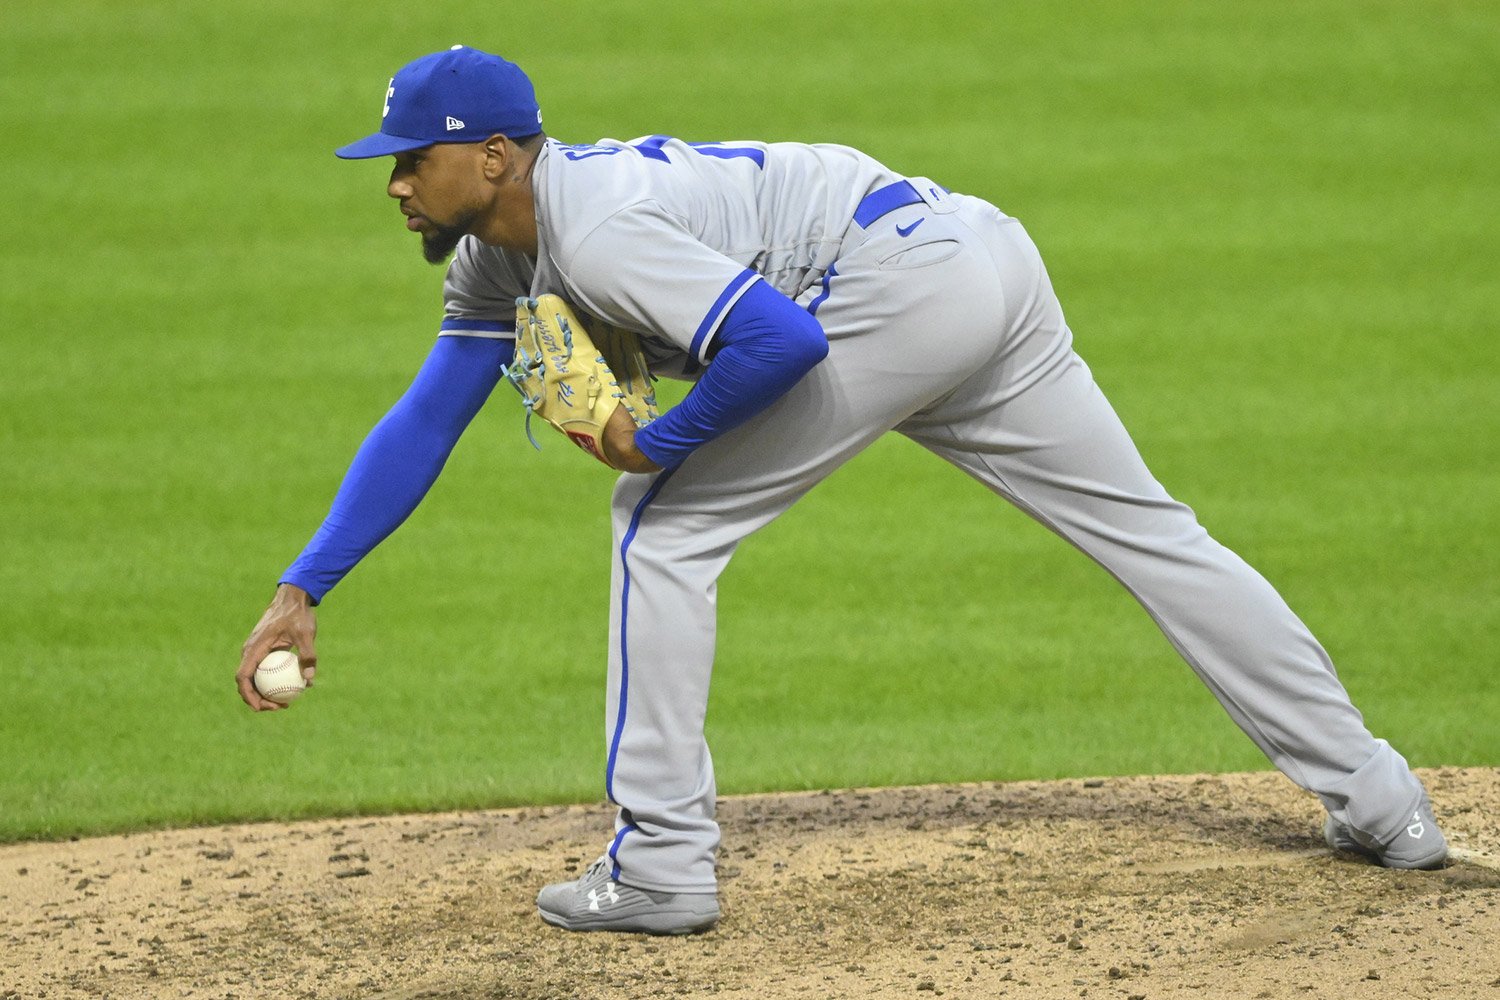 New Cubs right-hander Jose Cuas brings unique arm slot, story to bullpen -  Chicago Sun-Times